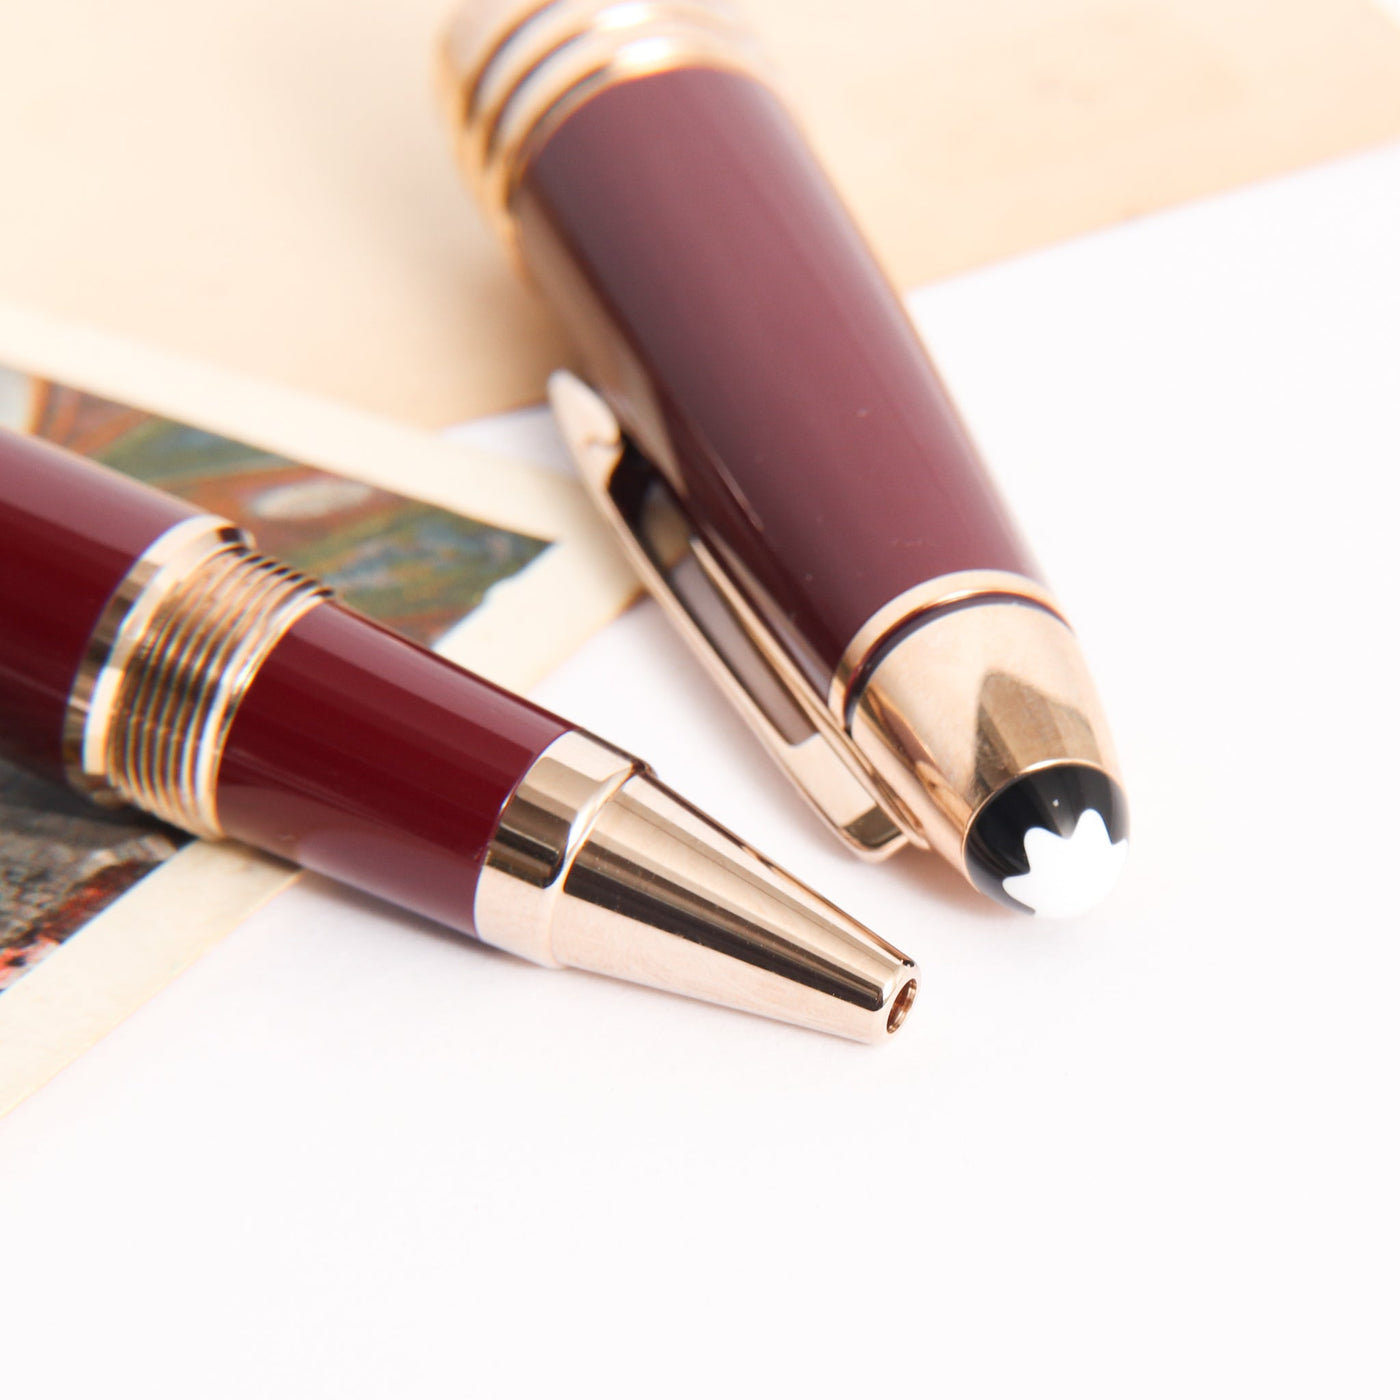 Montblanc-Great-Characters-John-F-Kennedy-Burgundy-Rollerball-Pen-Tip-Details